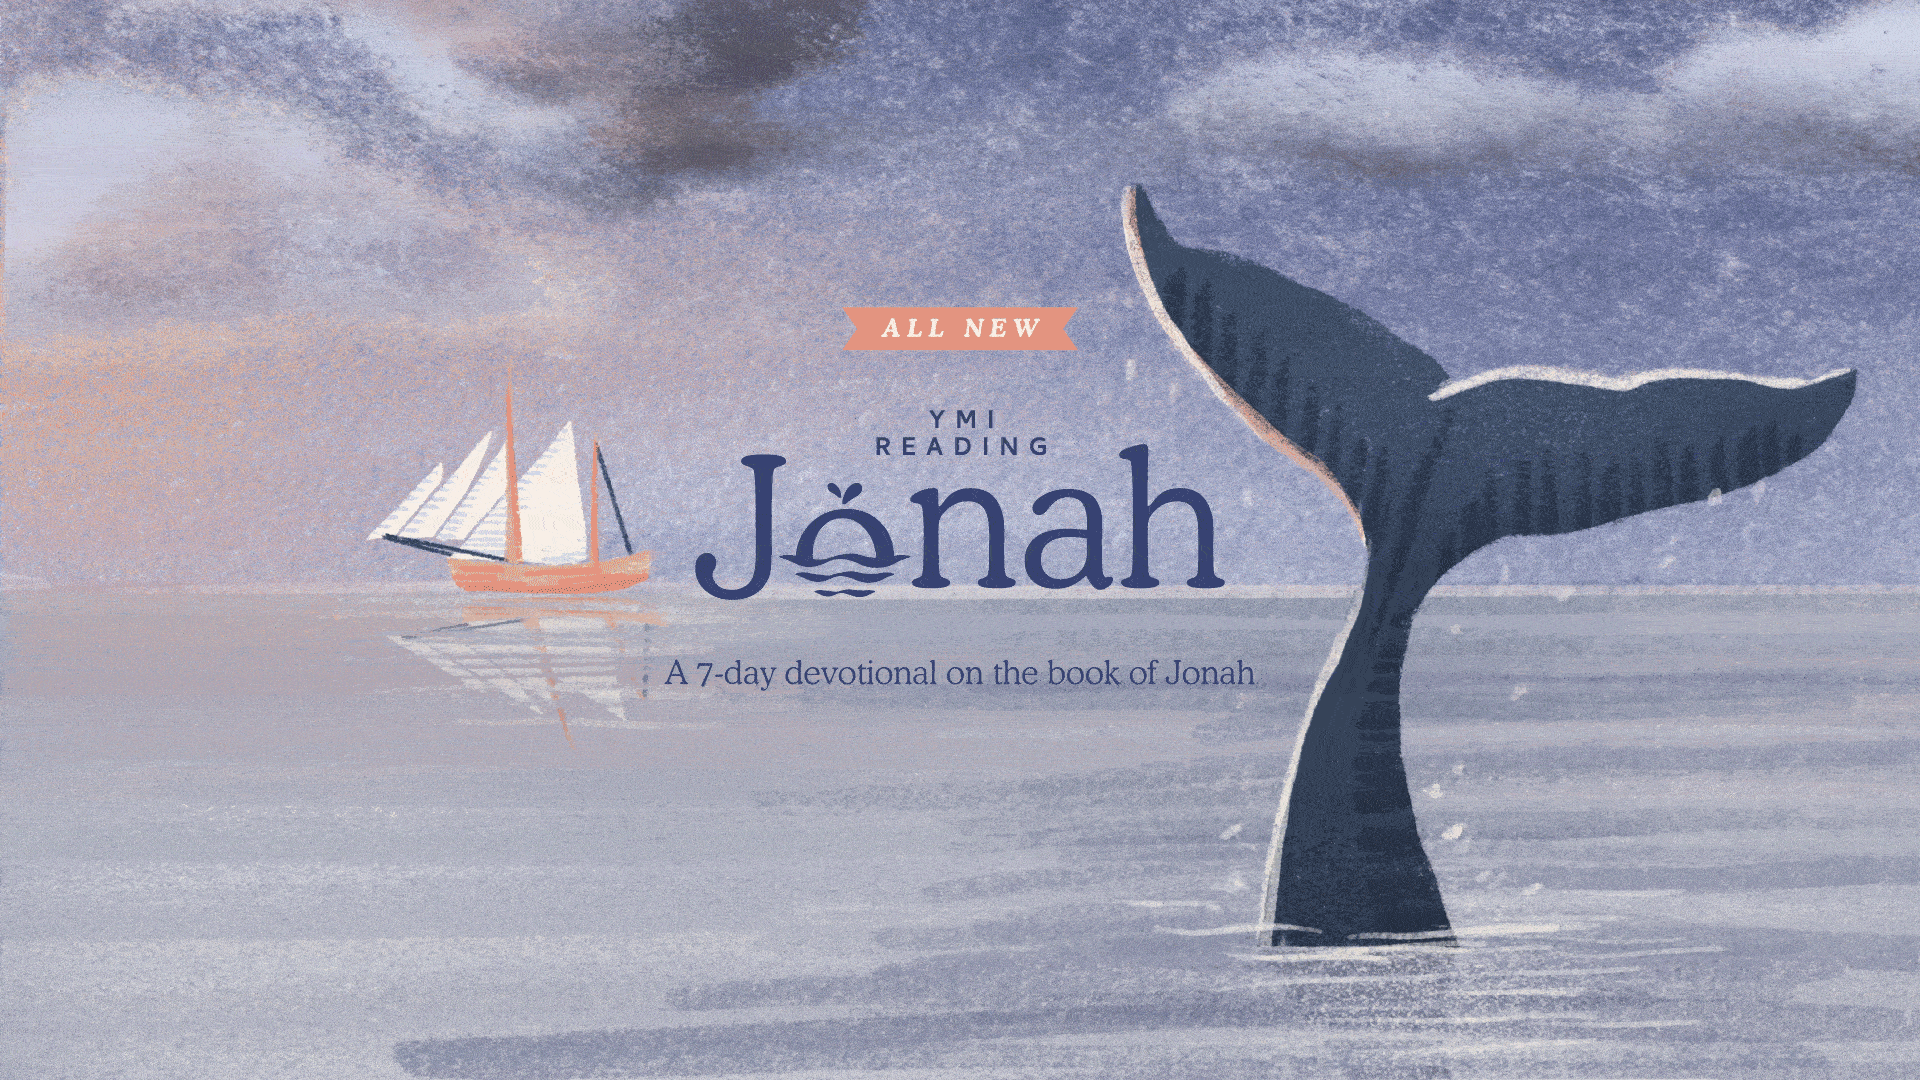 YMI Reading Jonah. A 7-day devotional on the book of Jonah.